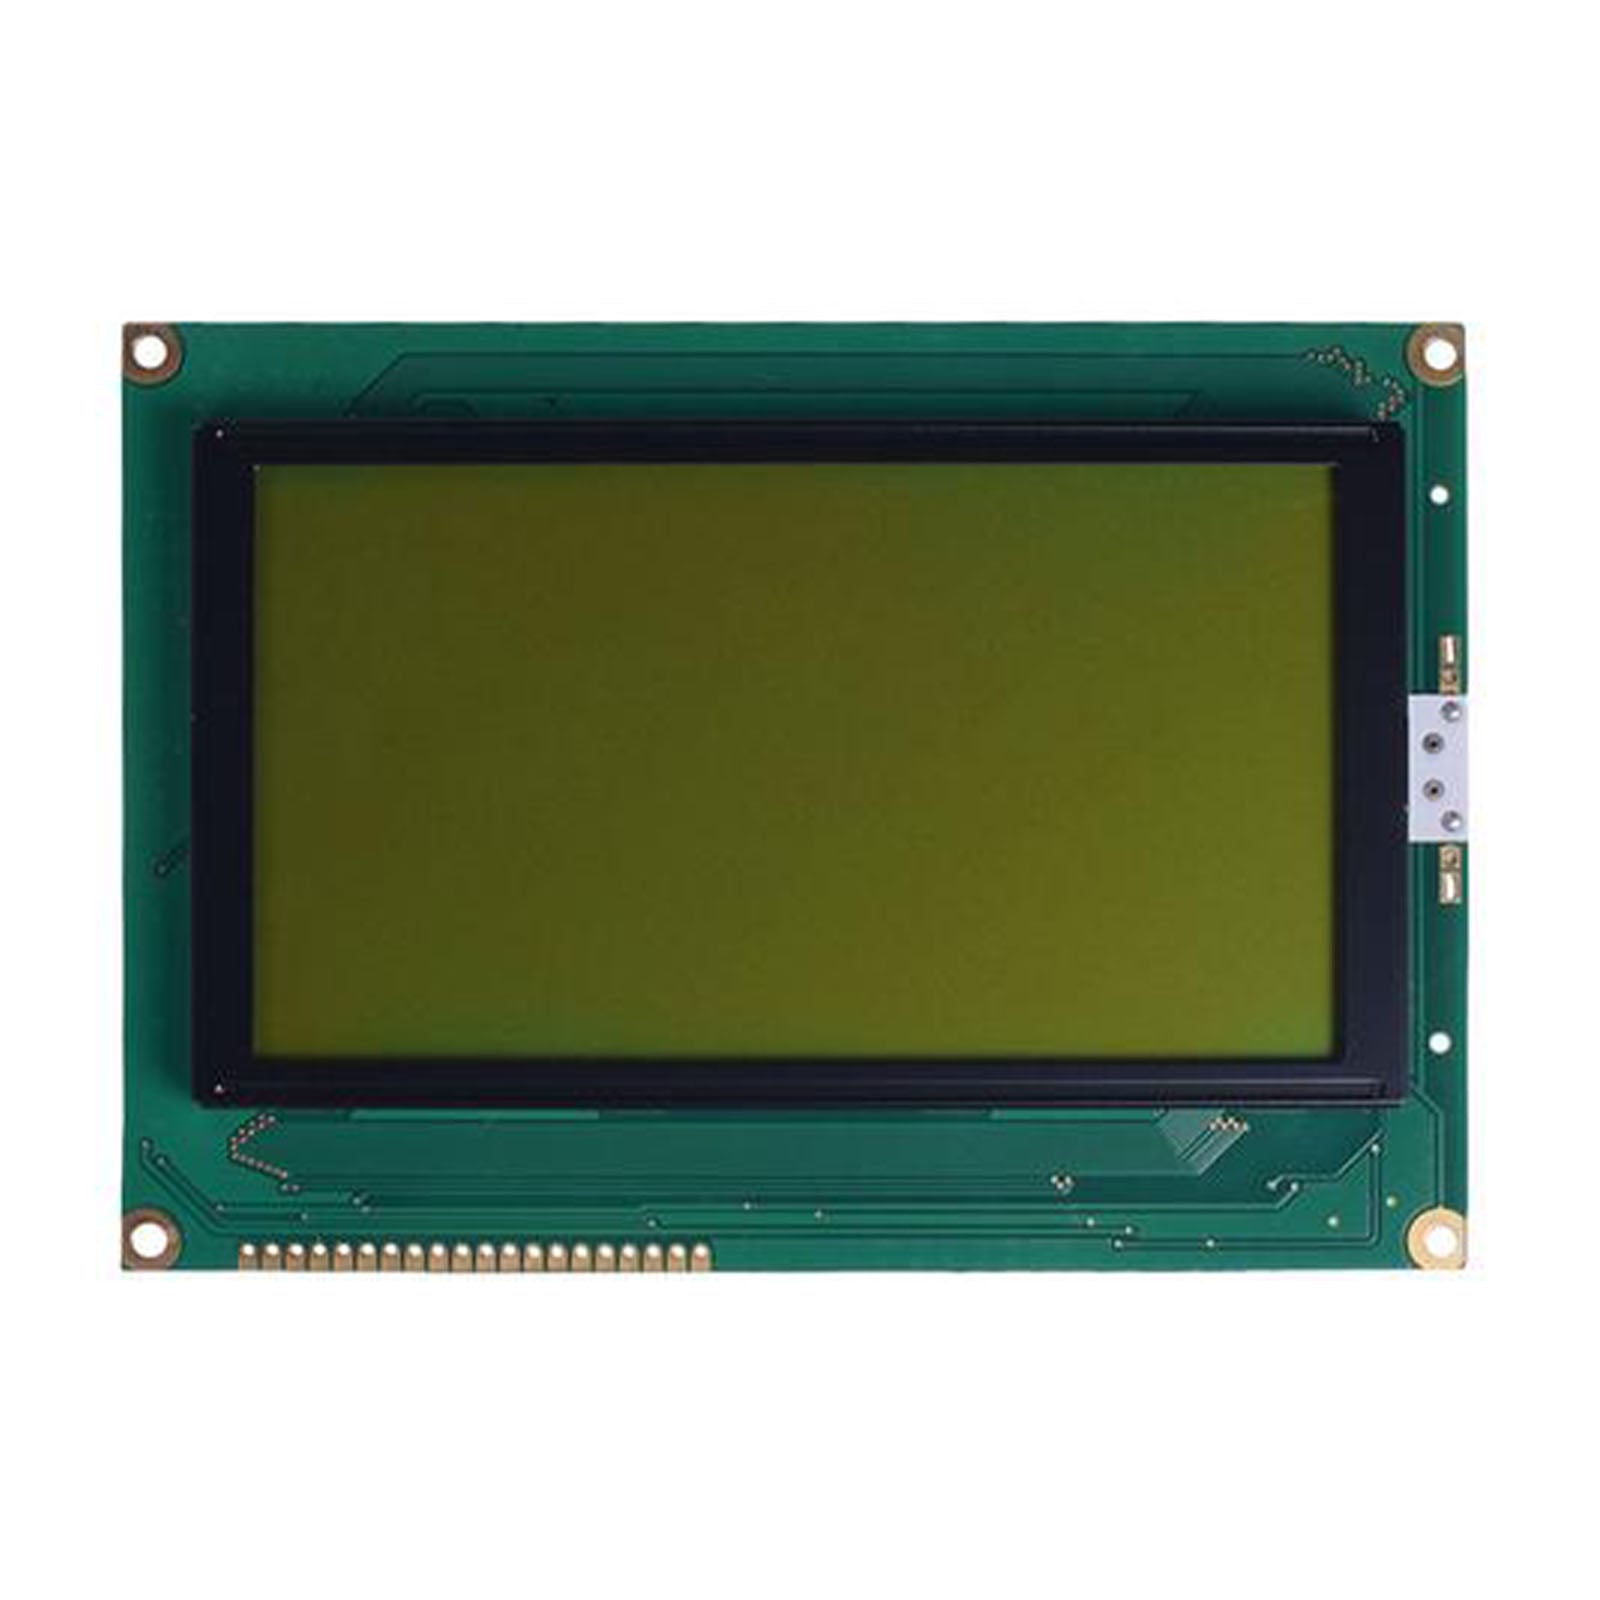 5.15-inch 240x128 Graphic Yellow LCD display module with MCU interface